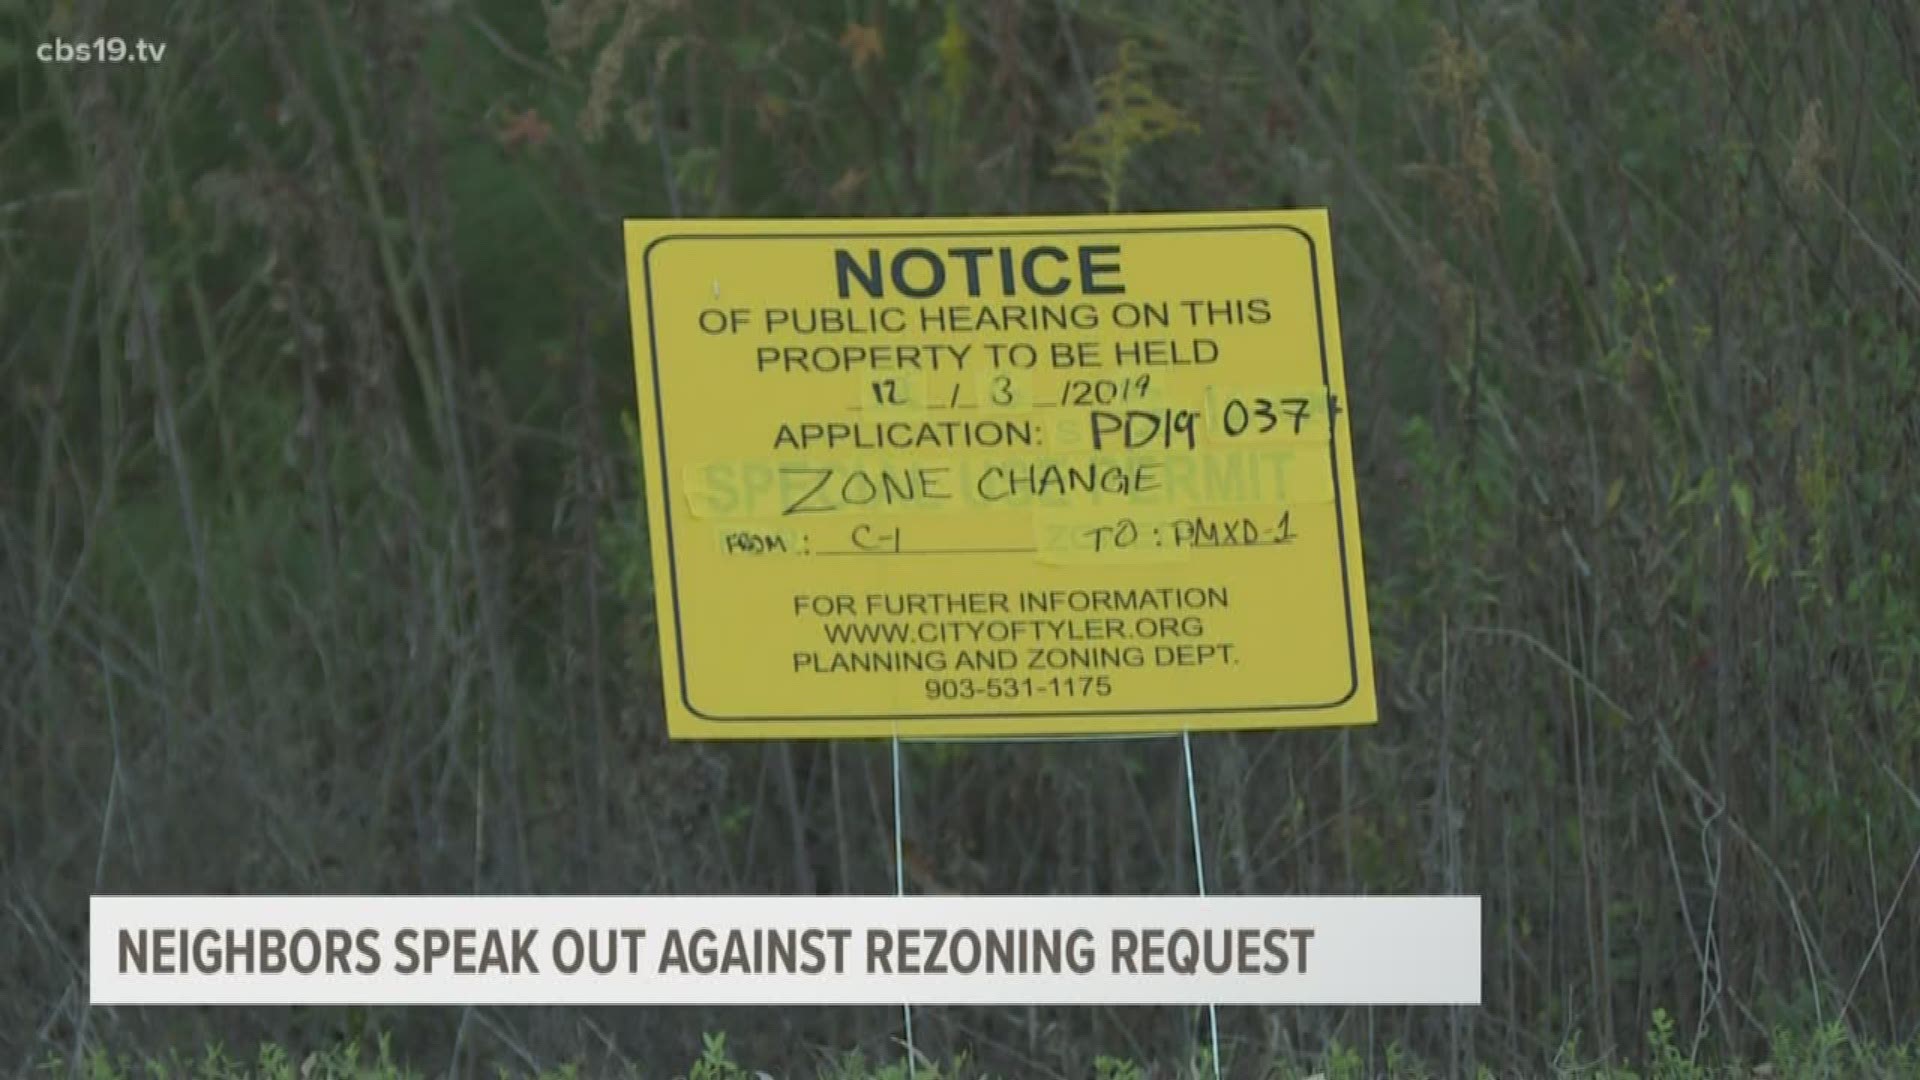 The Woods Subdivision community in Tyler spoke out against a proposed rezoning that would allow for apartments to be built near their homes.